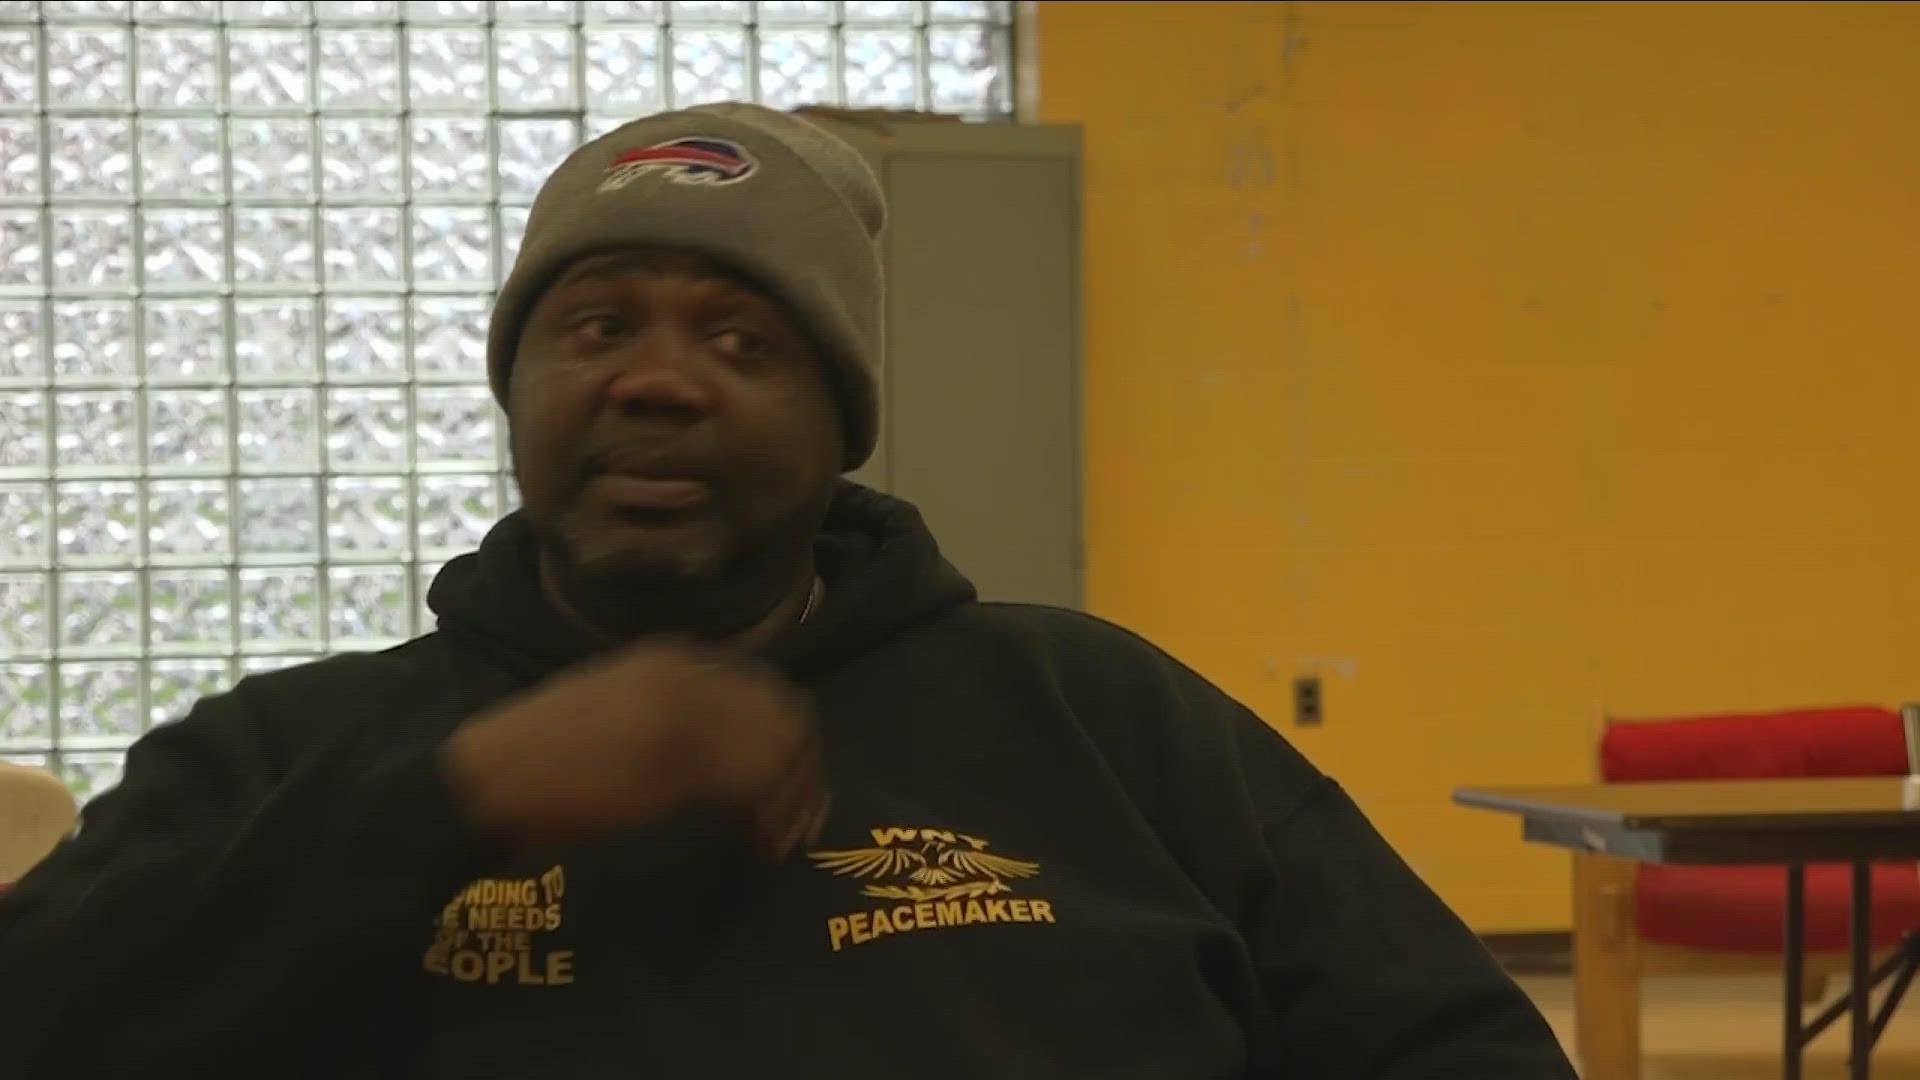 John "Tubbs" Smith is a man with a record, and a mission. As a member of the Buffalo Peacemakers, he's working with city teens to avoid the making mistakes he made.